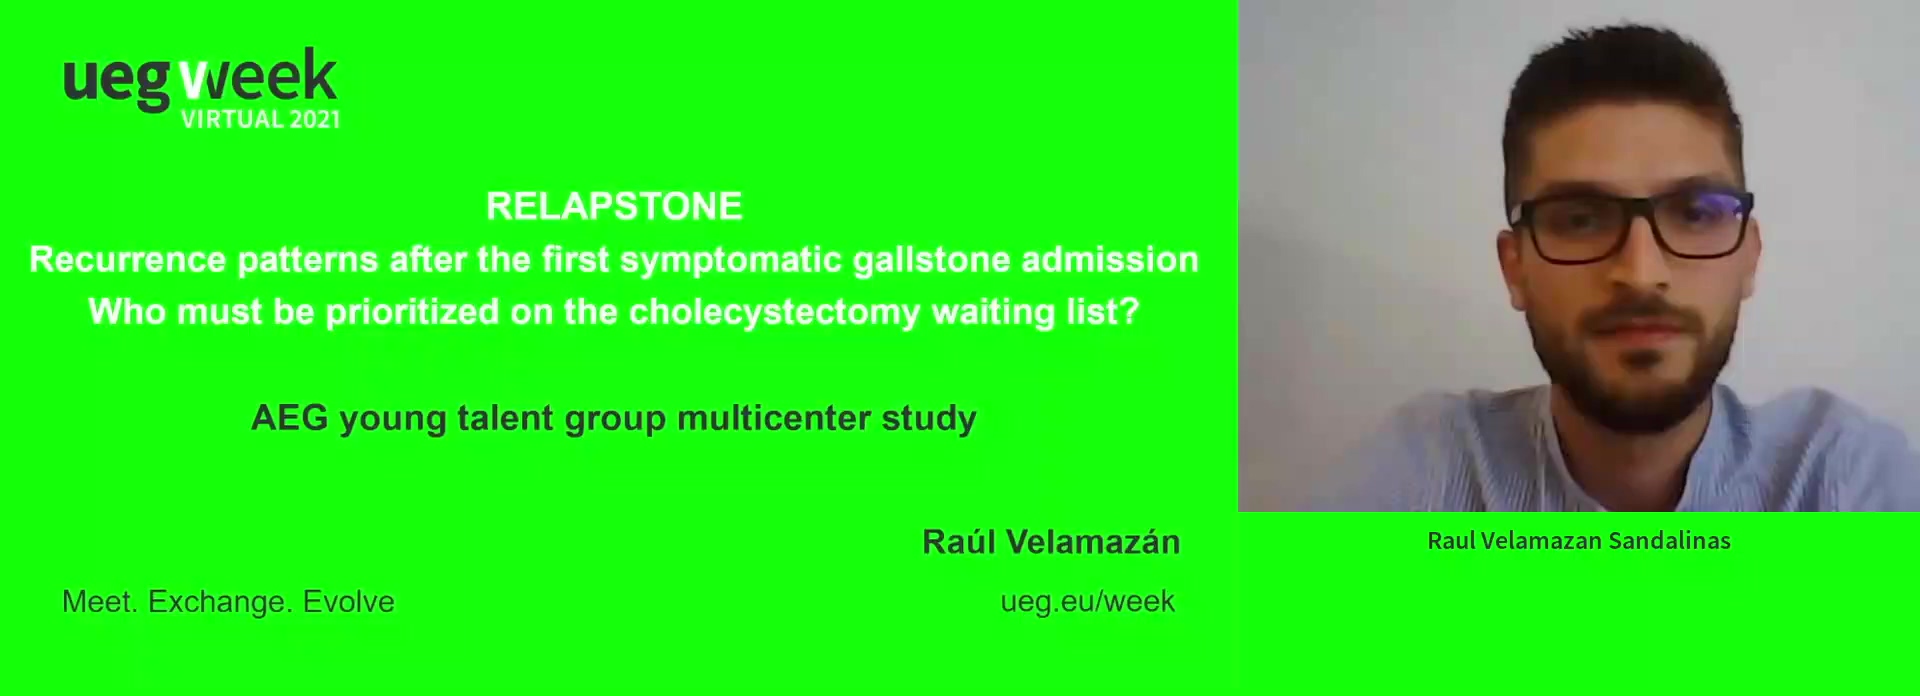 RECURRENCE PATTERNS AFTER FIRST SYMPTOMATIC GALLSTONE ADMISSION. WHO MUST BE PRIORITIZED ON THE CHOLECYSTECTOMY WAITING LIST? RELAPSTONE, AN AEG YOUNG TALENT GROUP MULTICENTER STUDY